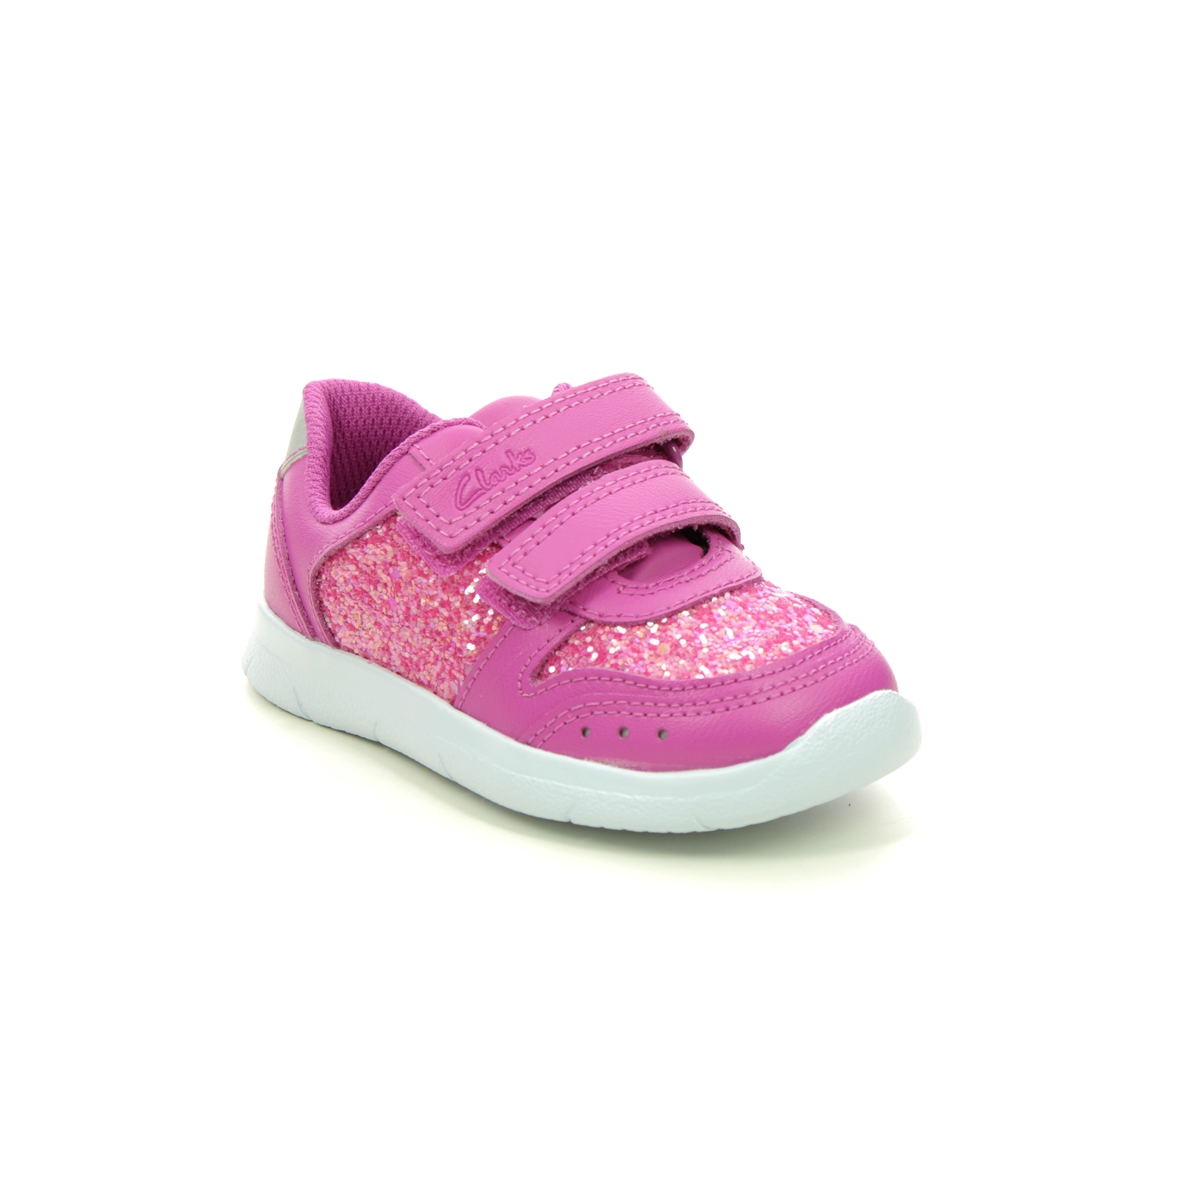 Clarks Ath Sonar T Hot Pink Kids Toddler Girls Trainers 637916F In Size 6 In Plain Hot Pink F Width Fitting Regular Fit